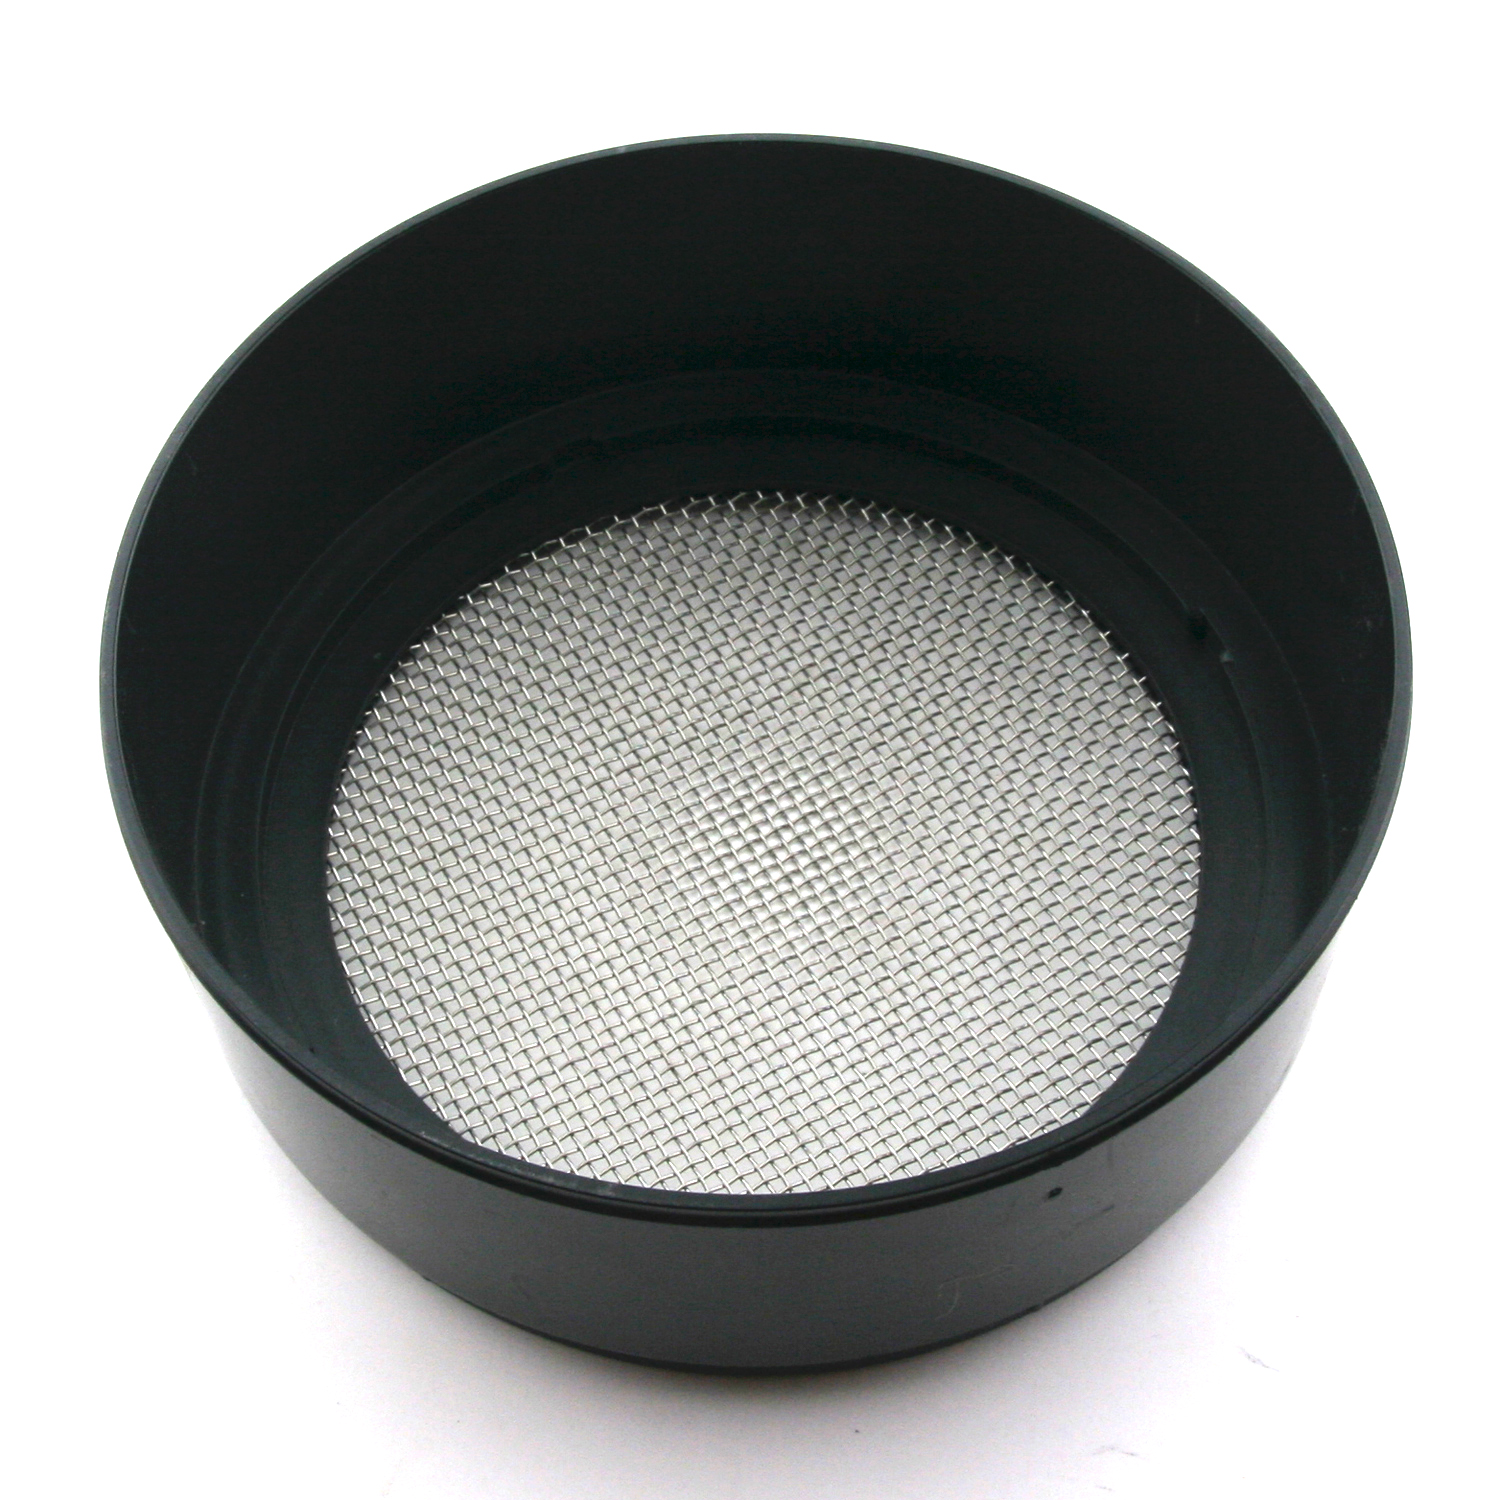 Details about   Soil Sieve Mesh Plastic Gardening Tool With Replaceable Screen For Teaching 